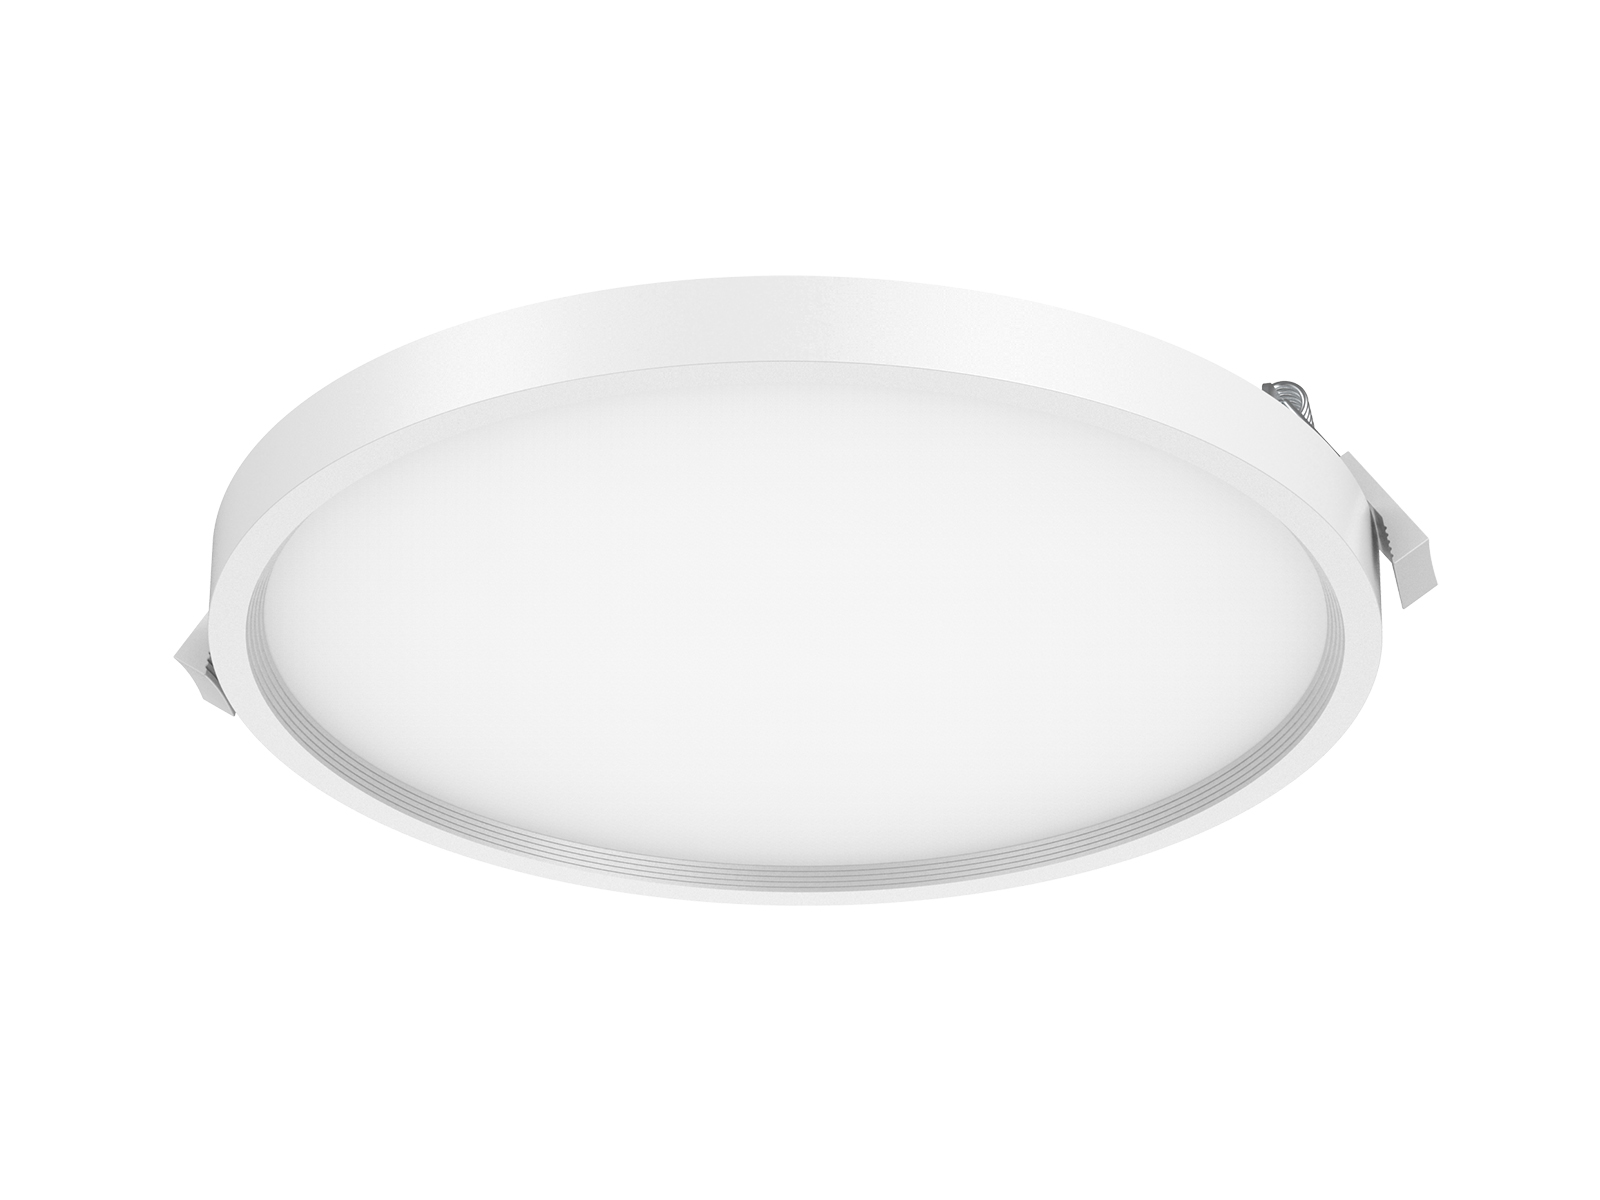 dimmable slimsurface led down light